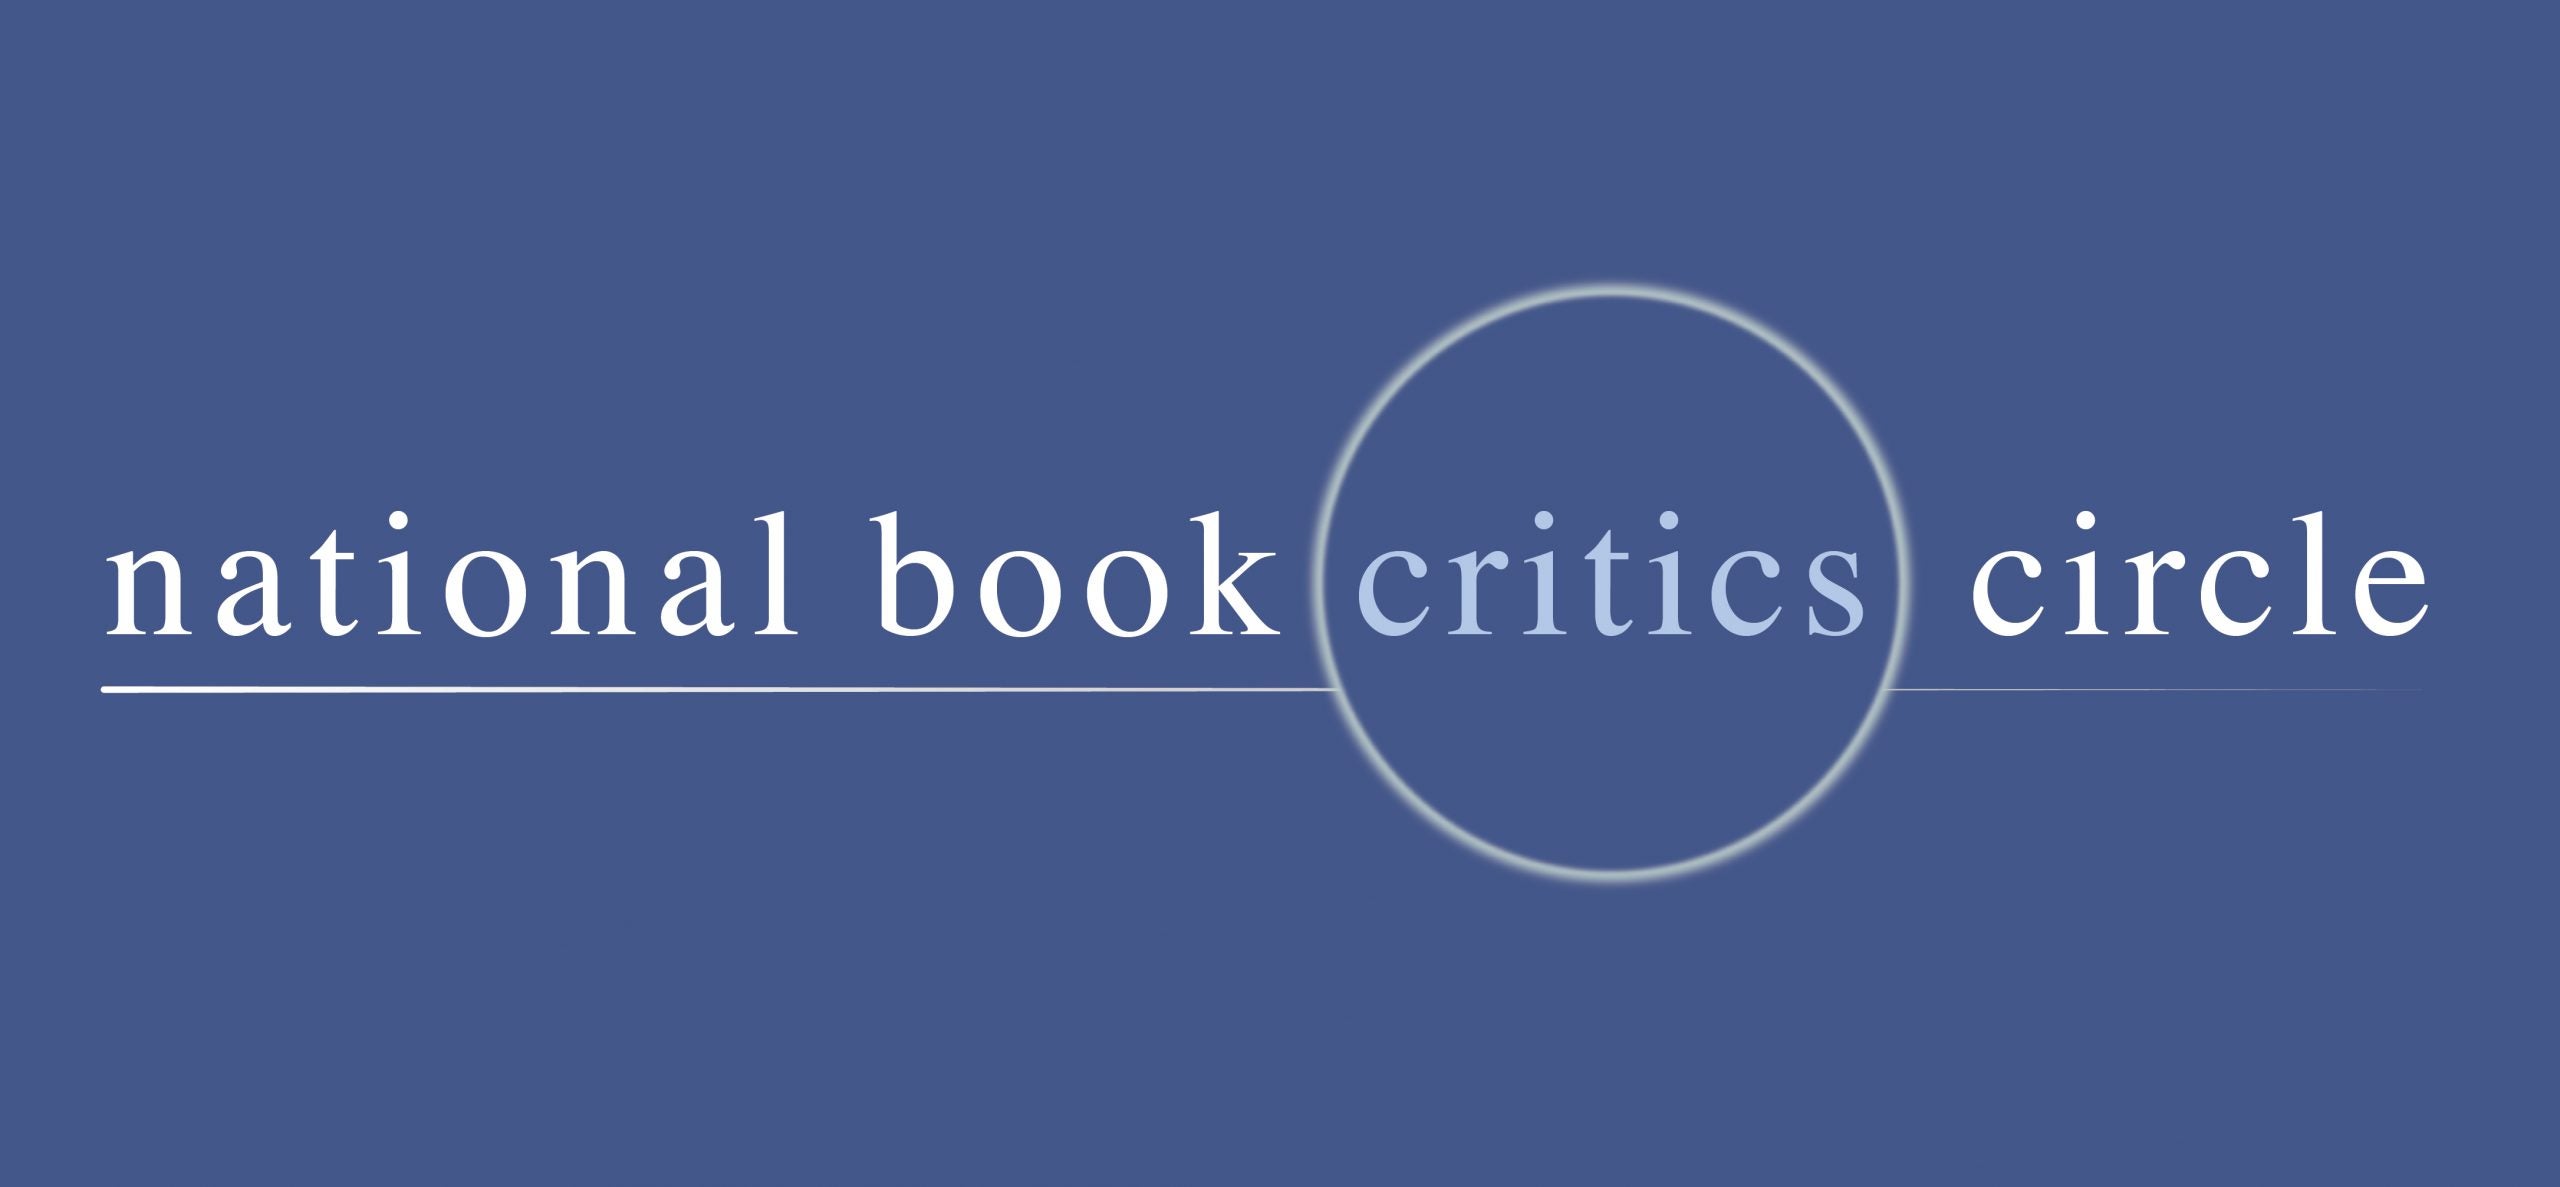 Congratulations to the Finalists and Winners Who Made The National Book Critics Circle List!